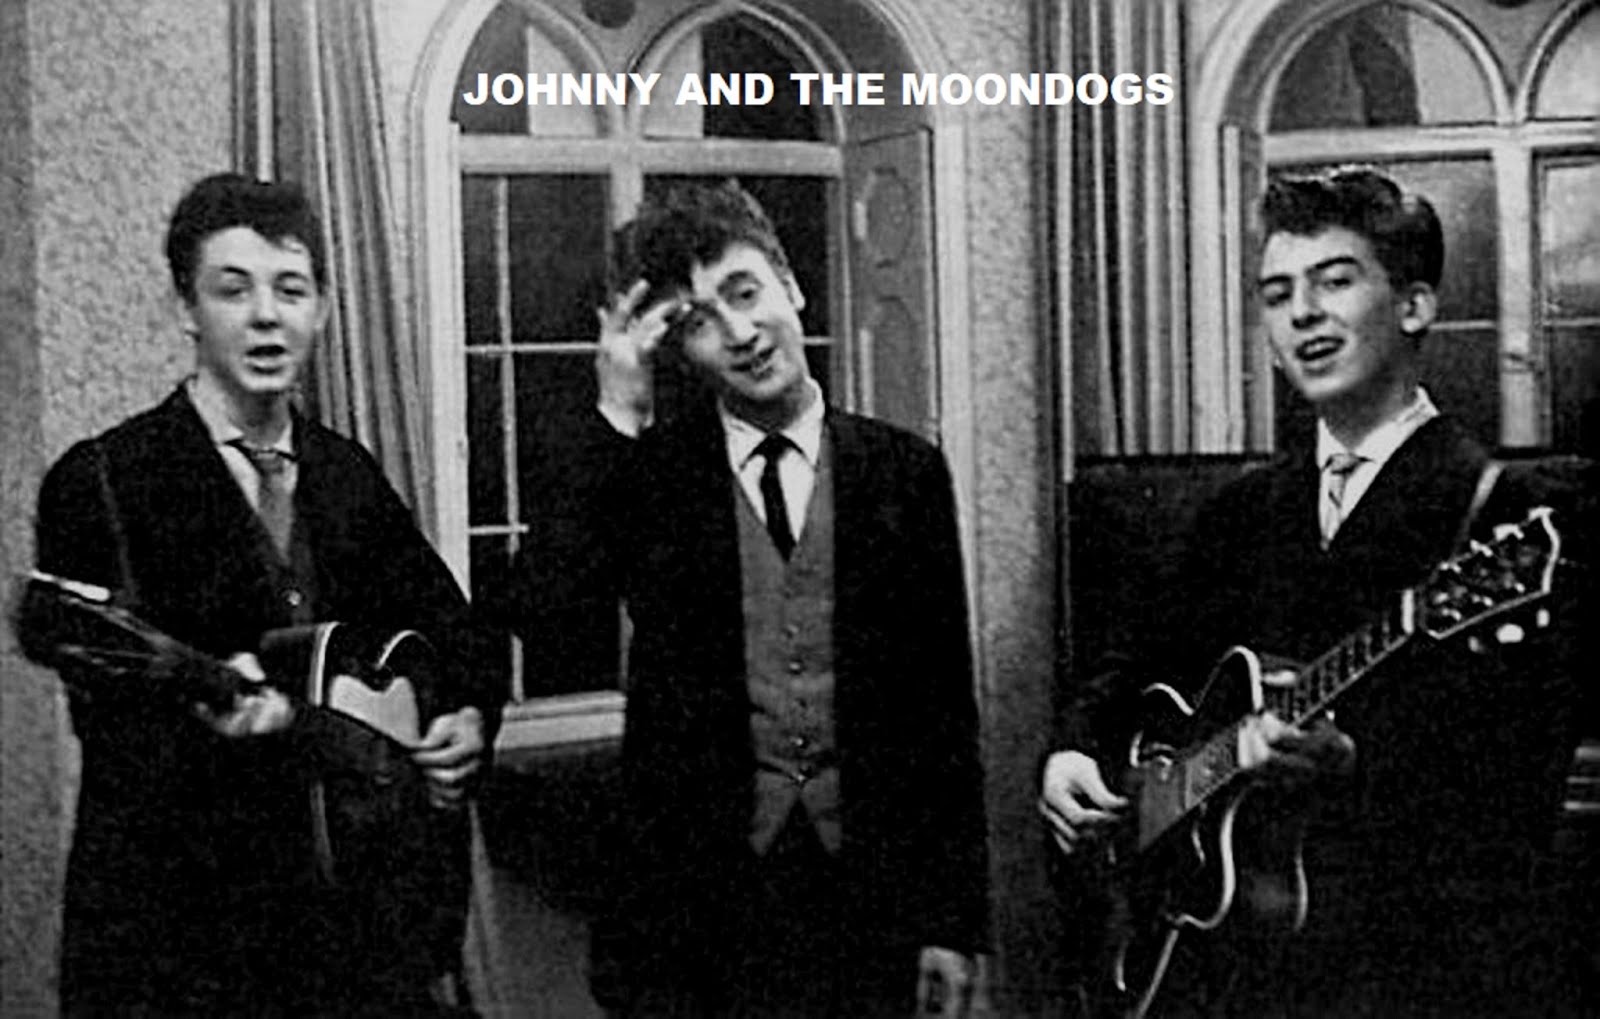 JOHNNY AND THE MOONDOGS